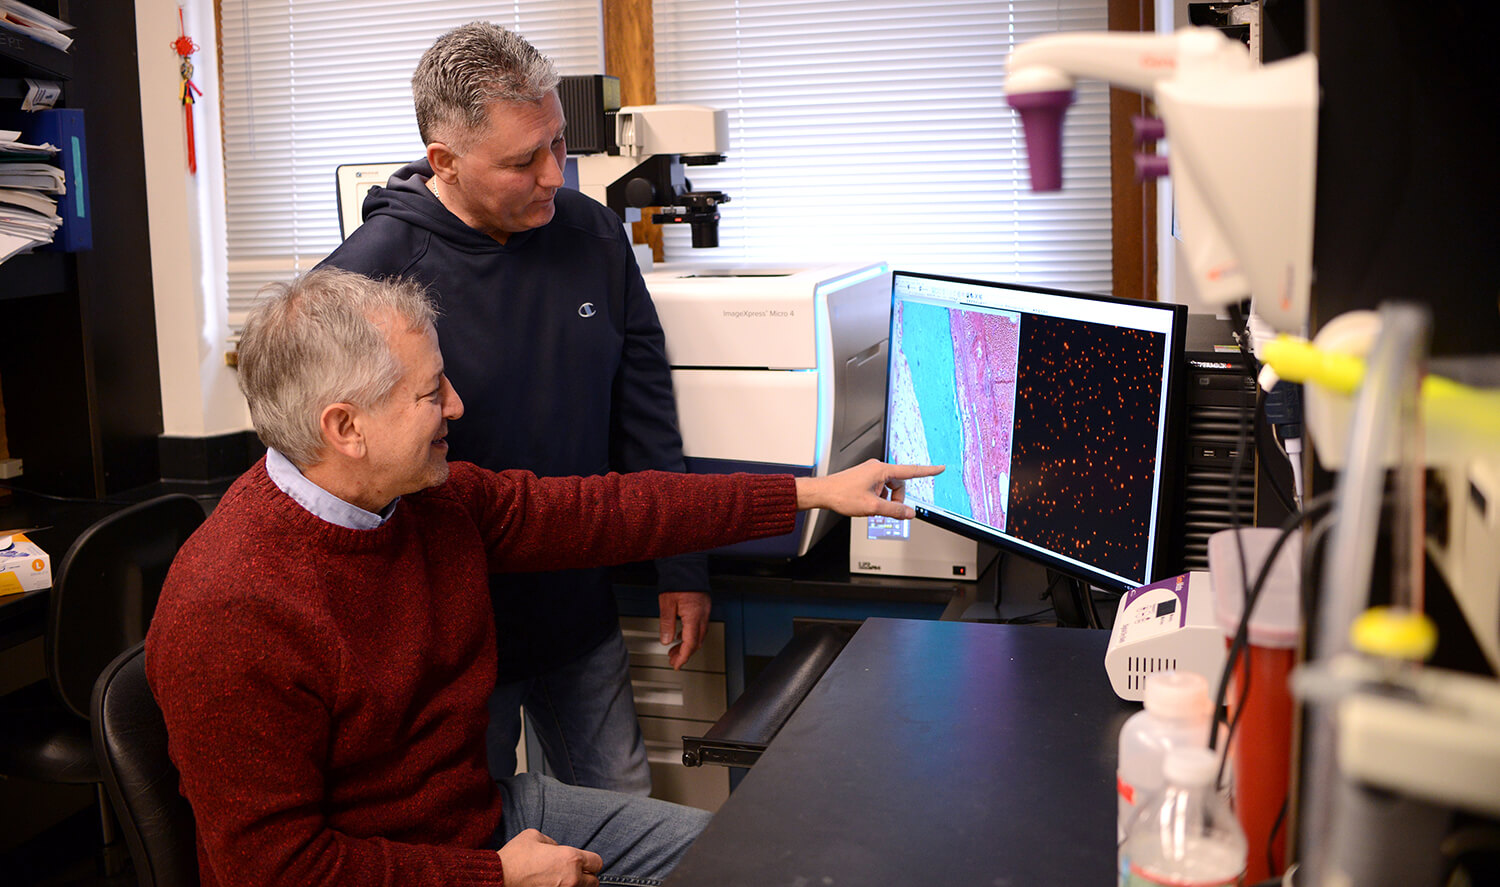 A lasting collaboration between Penn Vet’s Freedman (seated) and Harty is giving rise to promising compounds for targeting Ebola. The pair’s company, Intervir, is now working to refine inhibitor molecules they hope will prove effective at quelling Ebola infections in animal models—and one day, humans.